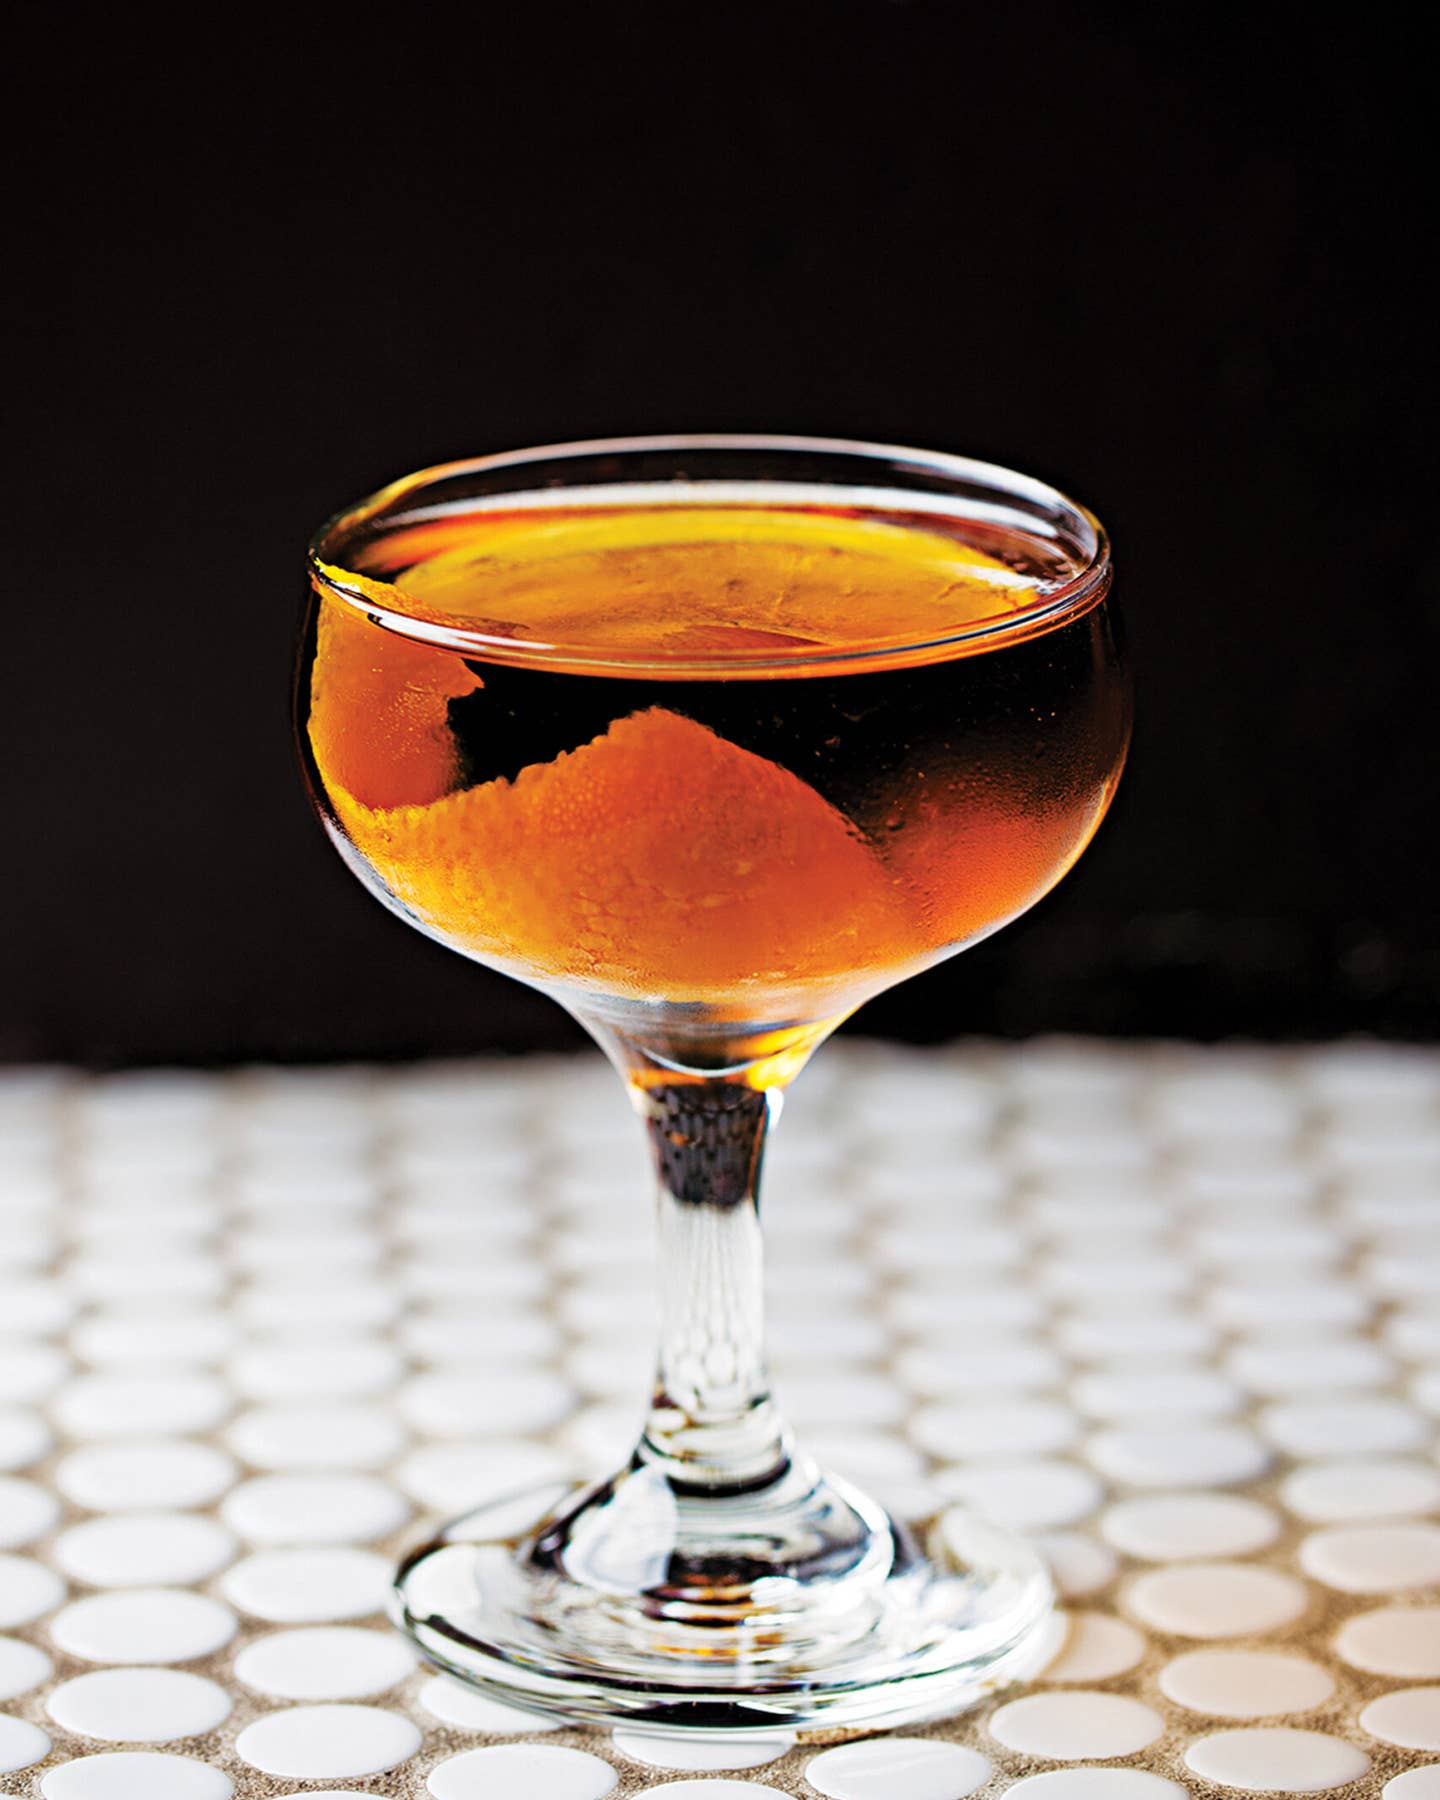 Vermouth on the Rise